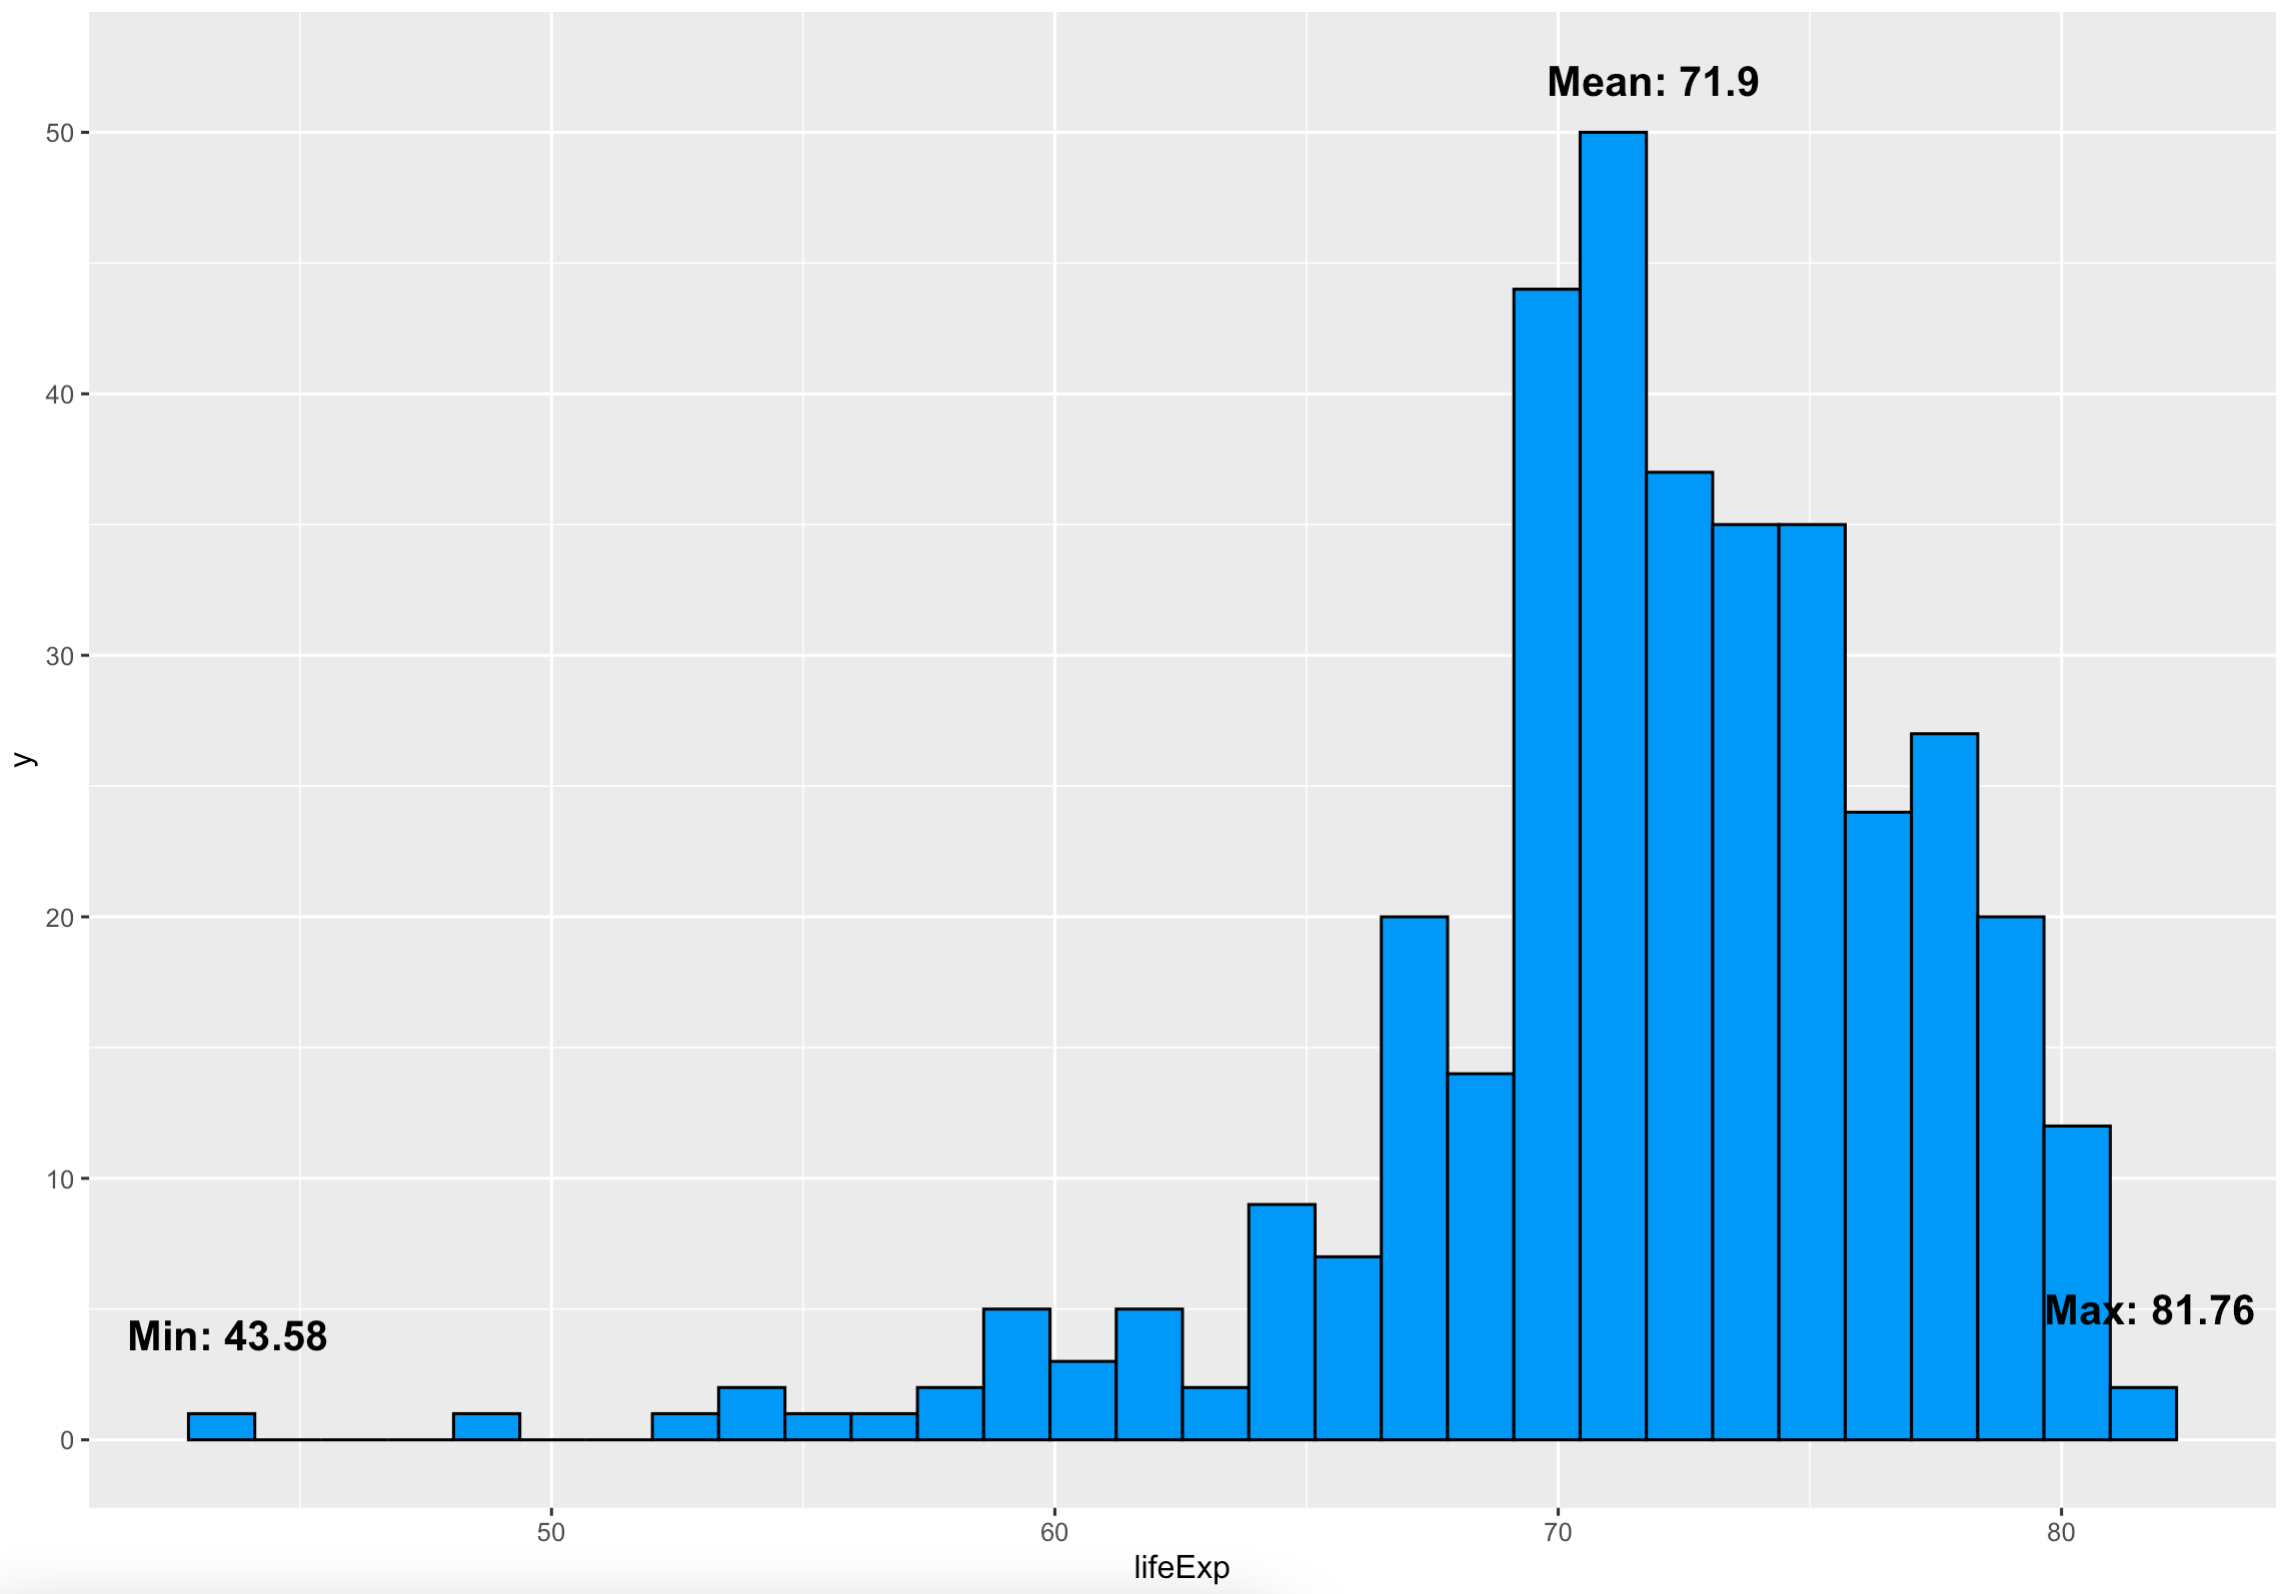 Image 8 - Adding annotations to histograms